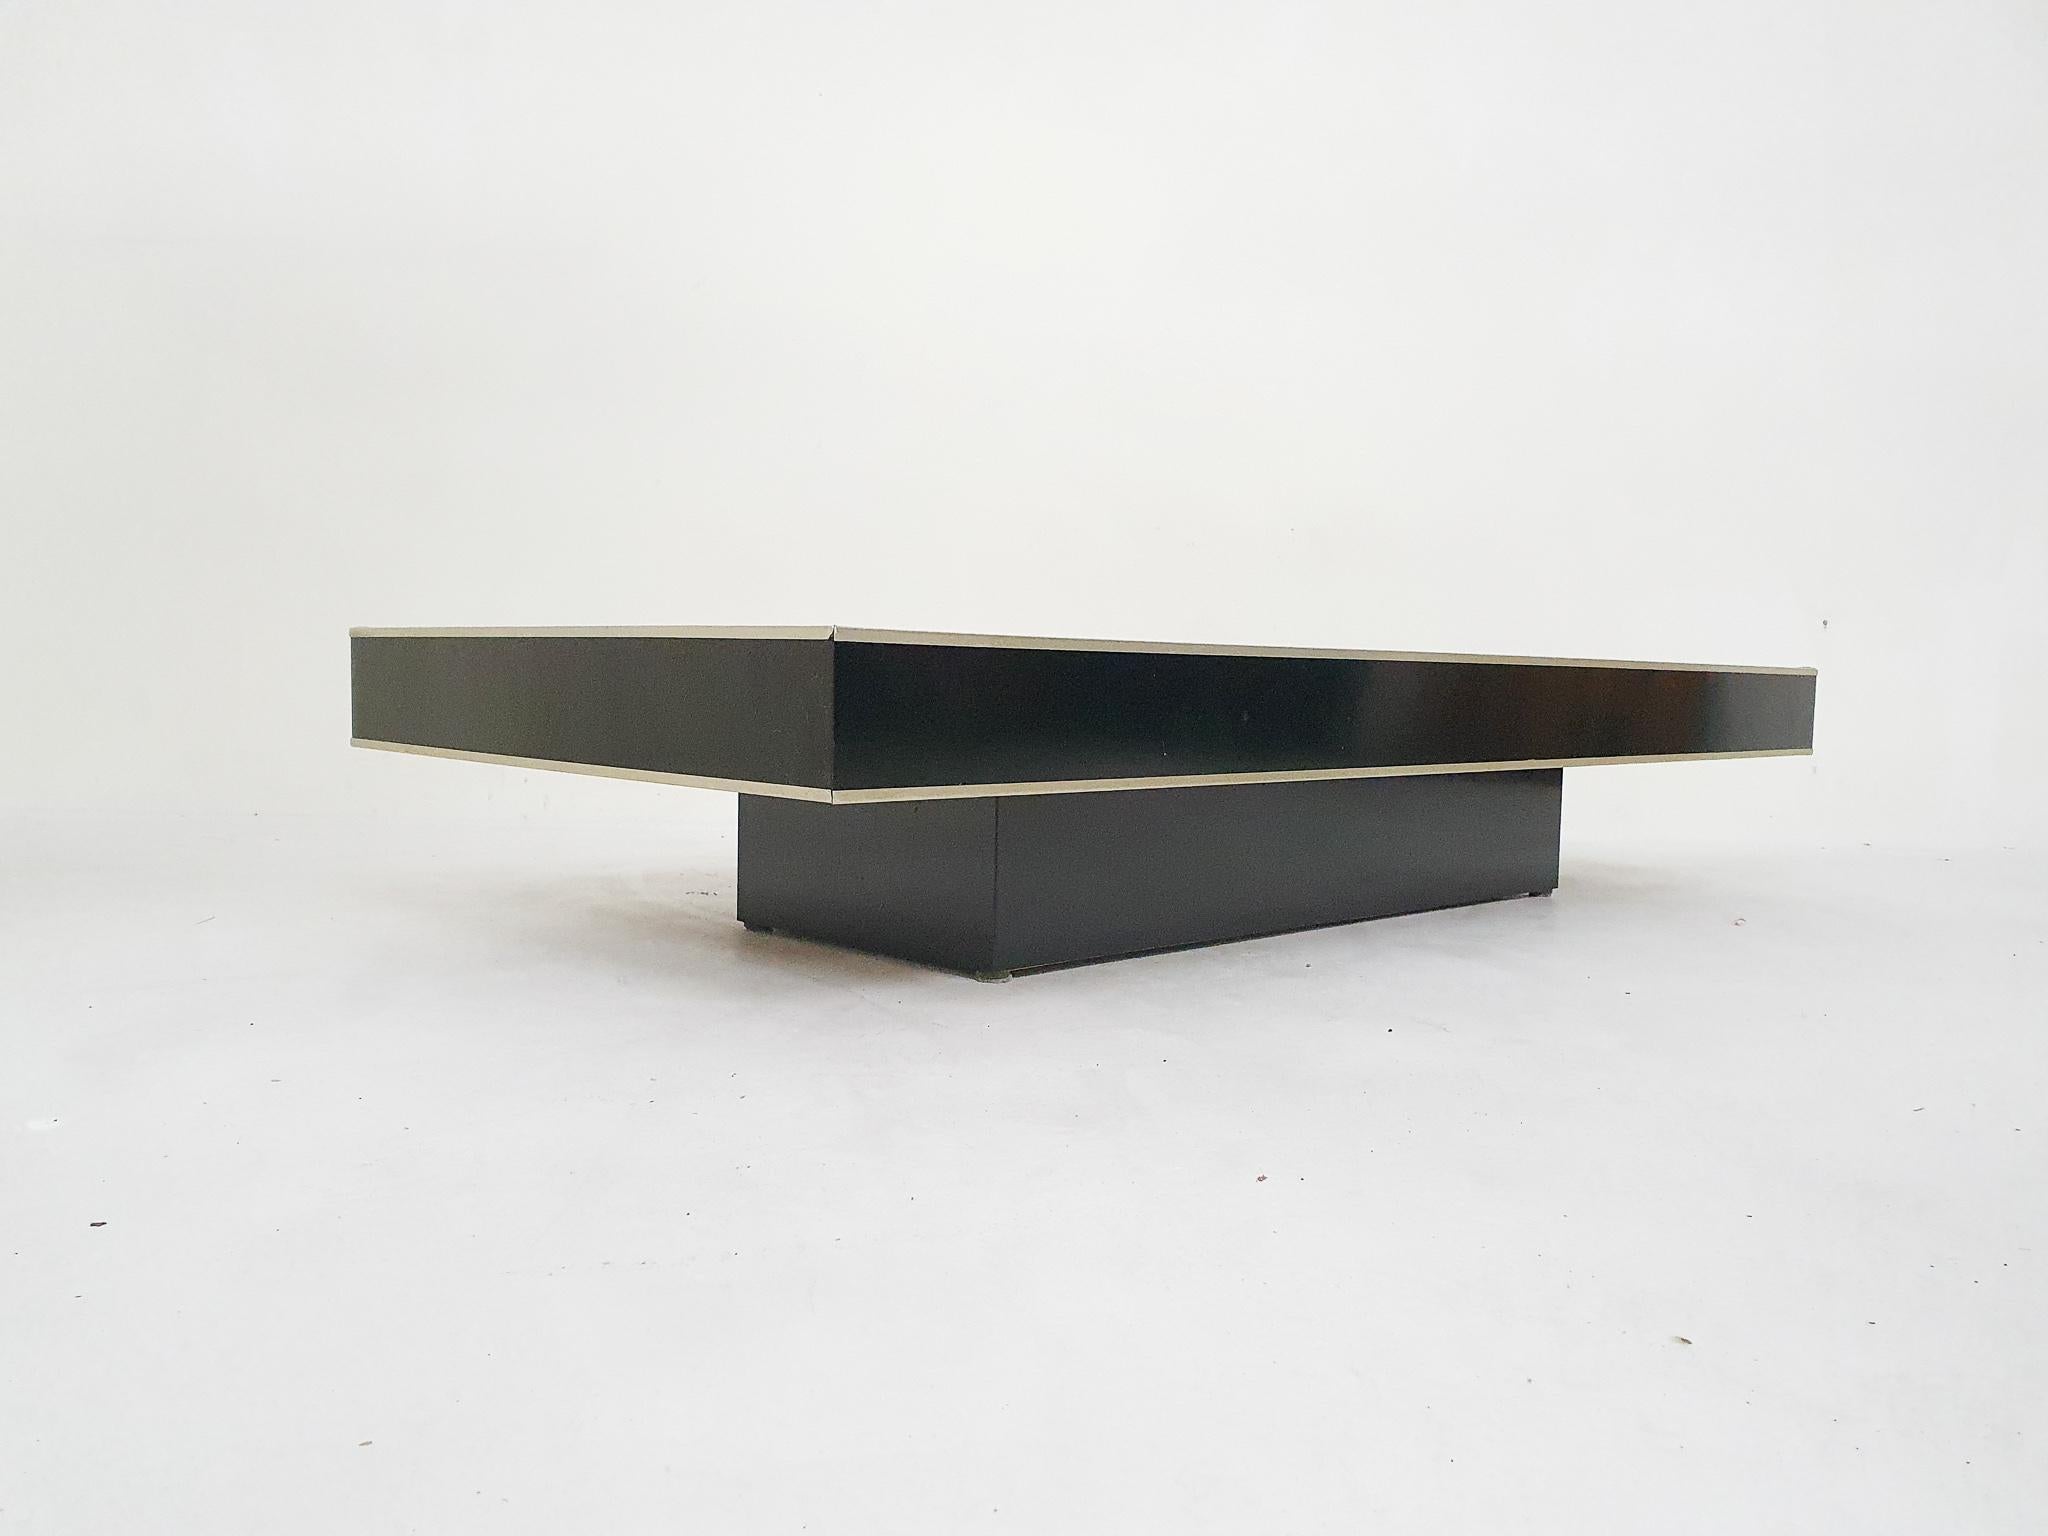 Glass Willy Rizzo Attrb. Mirrored Coffee Table, Belgium 1970's